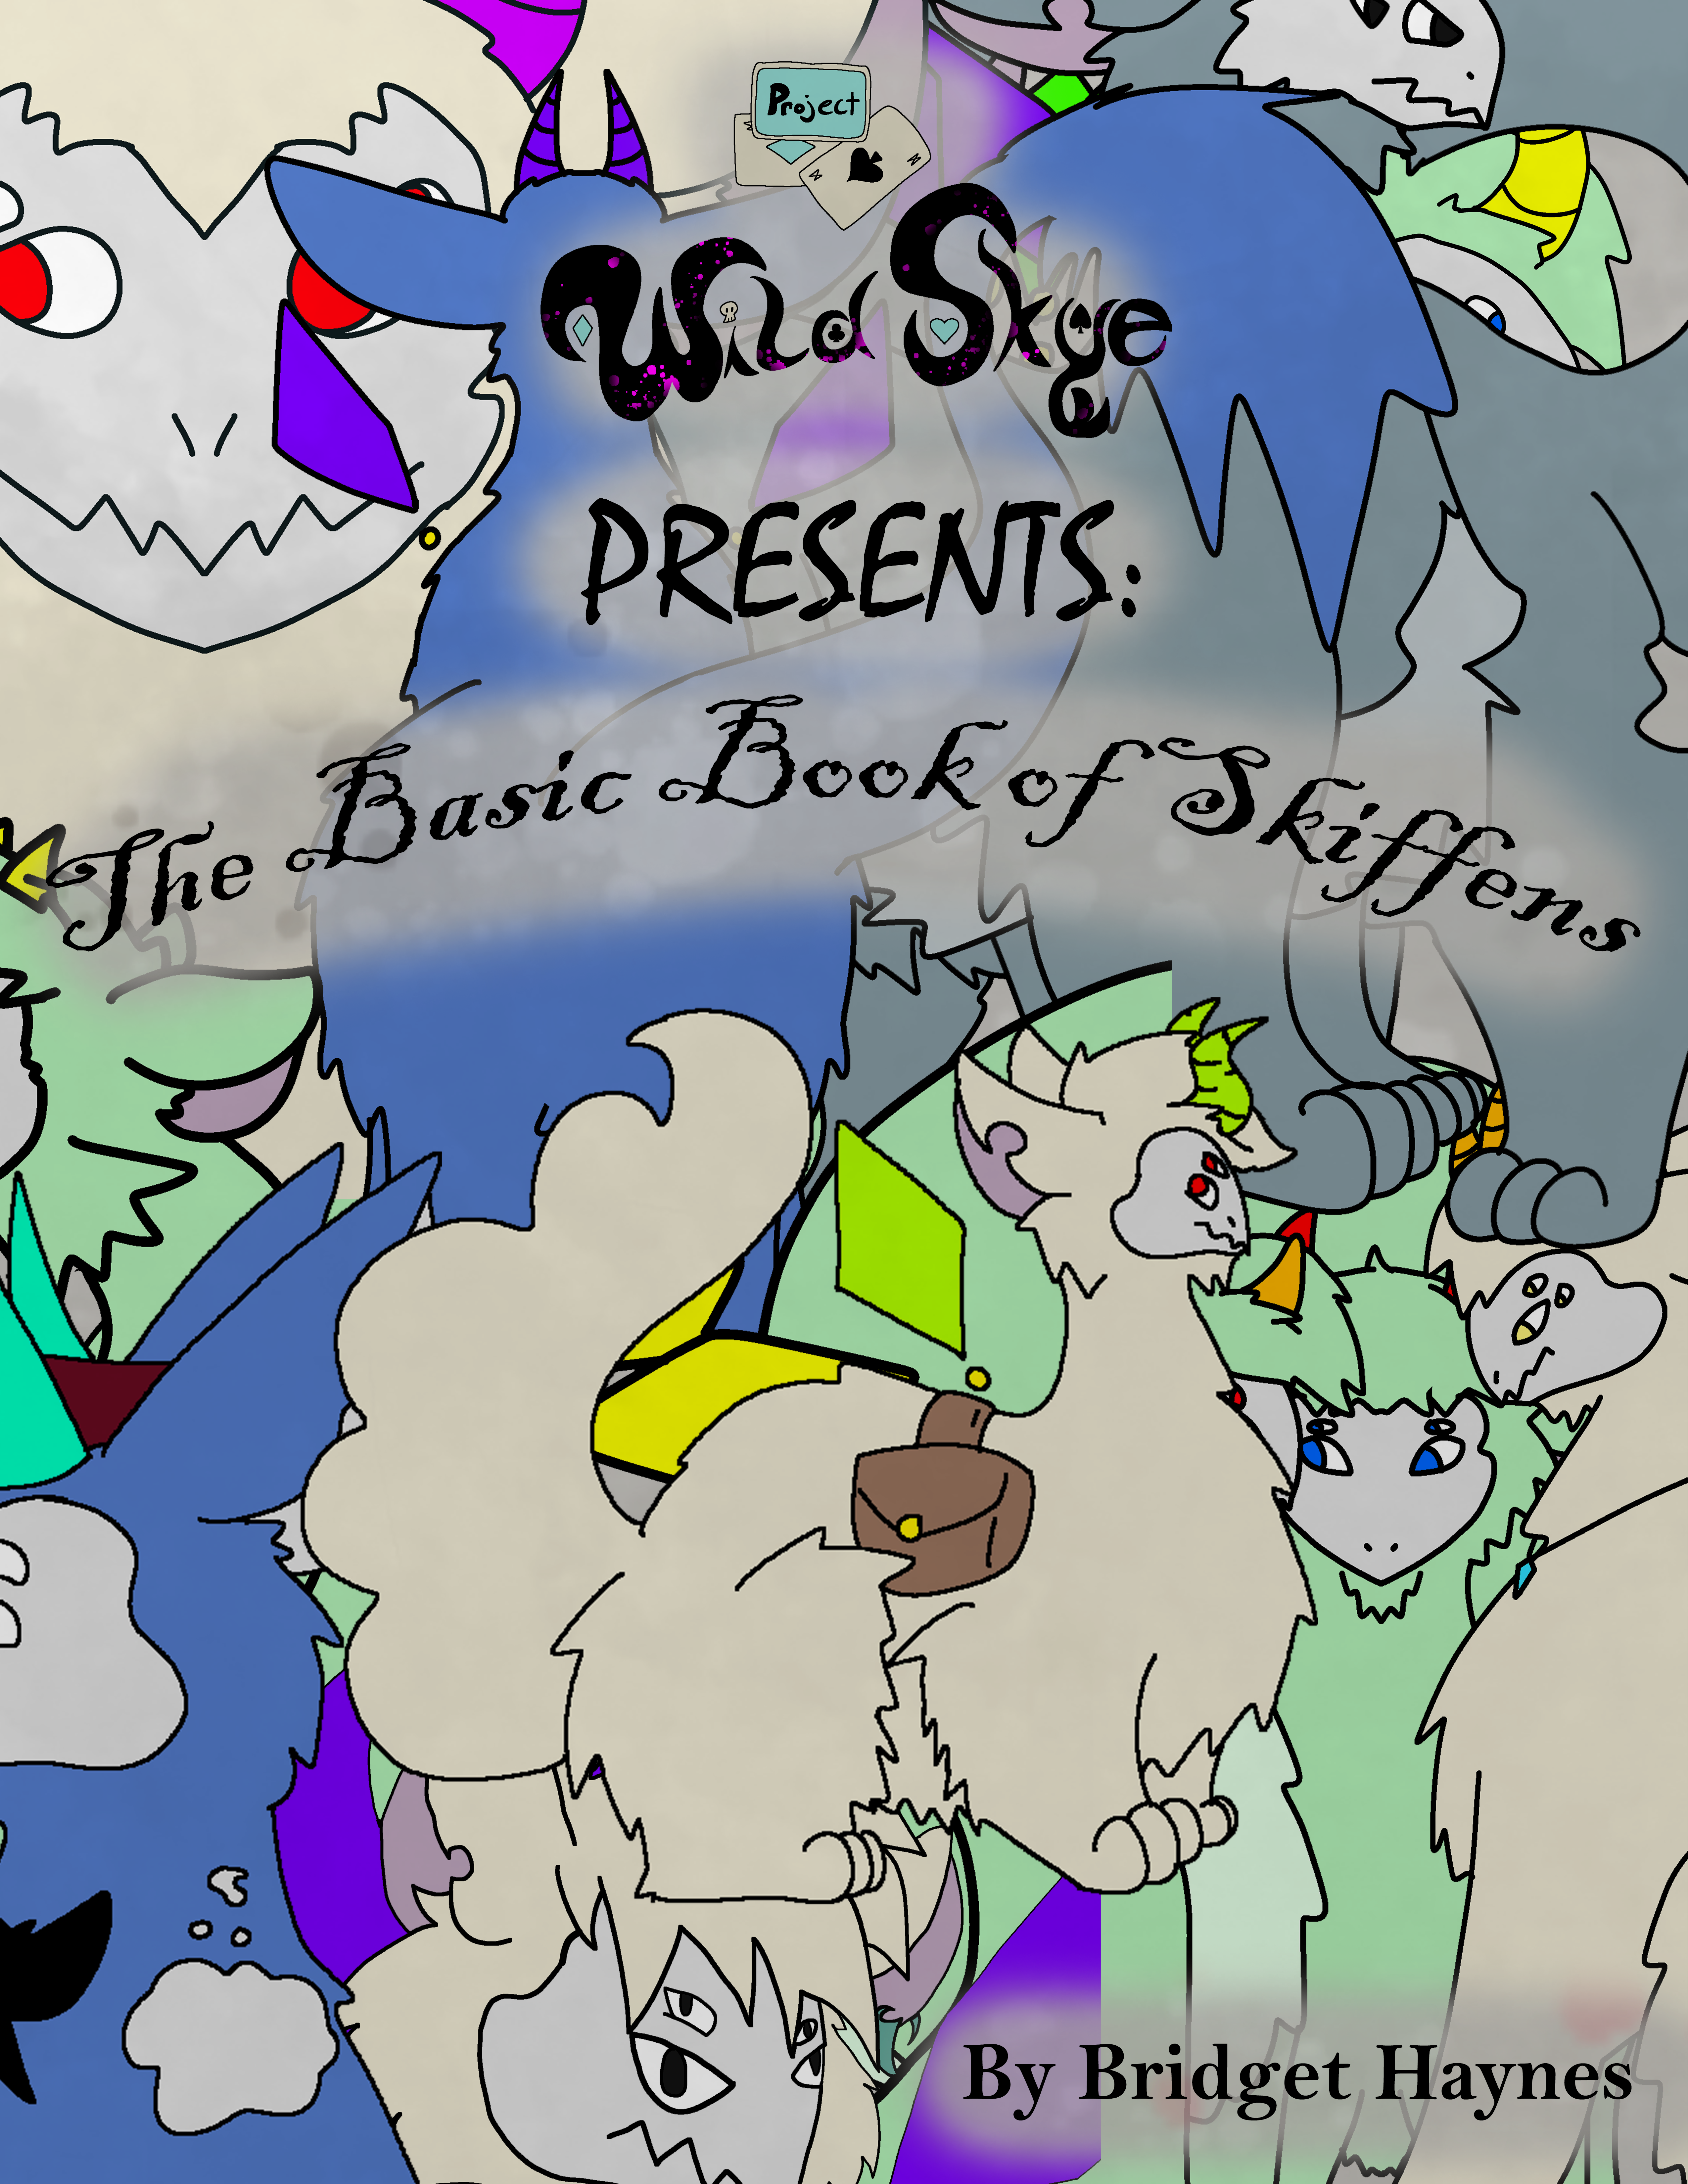 Project Wild Skye Presents: The Basic Book of Skiffens.